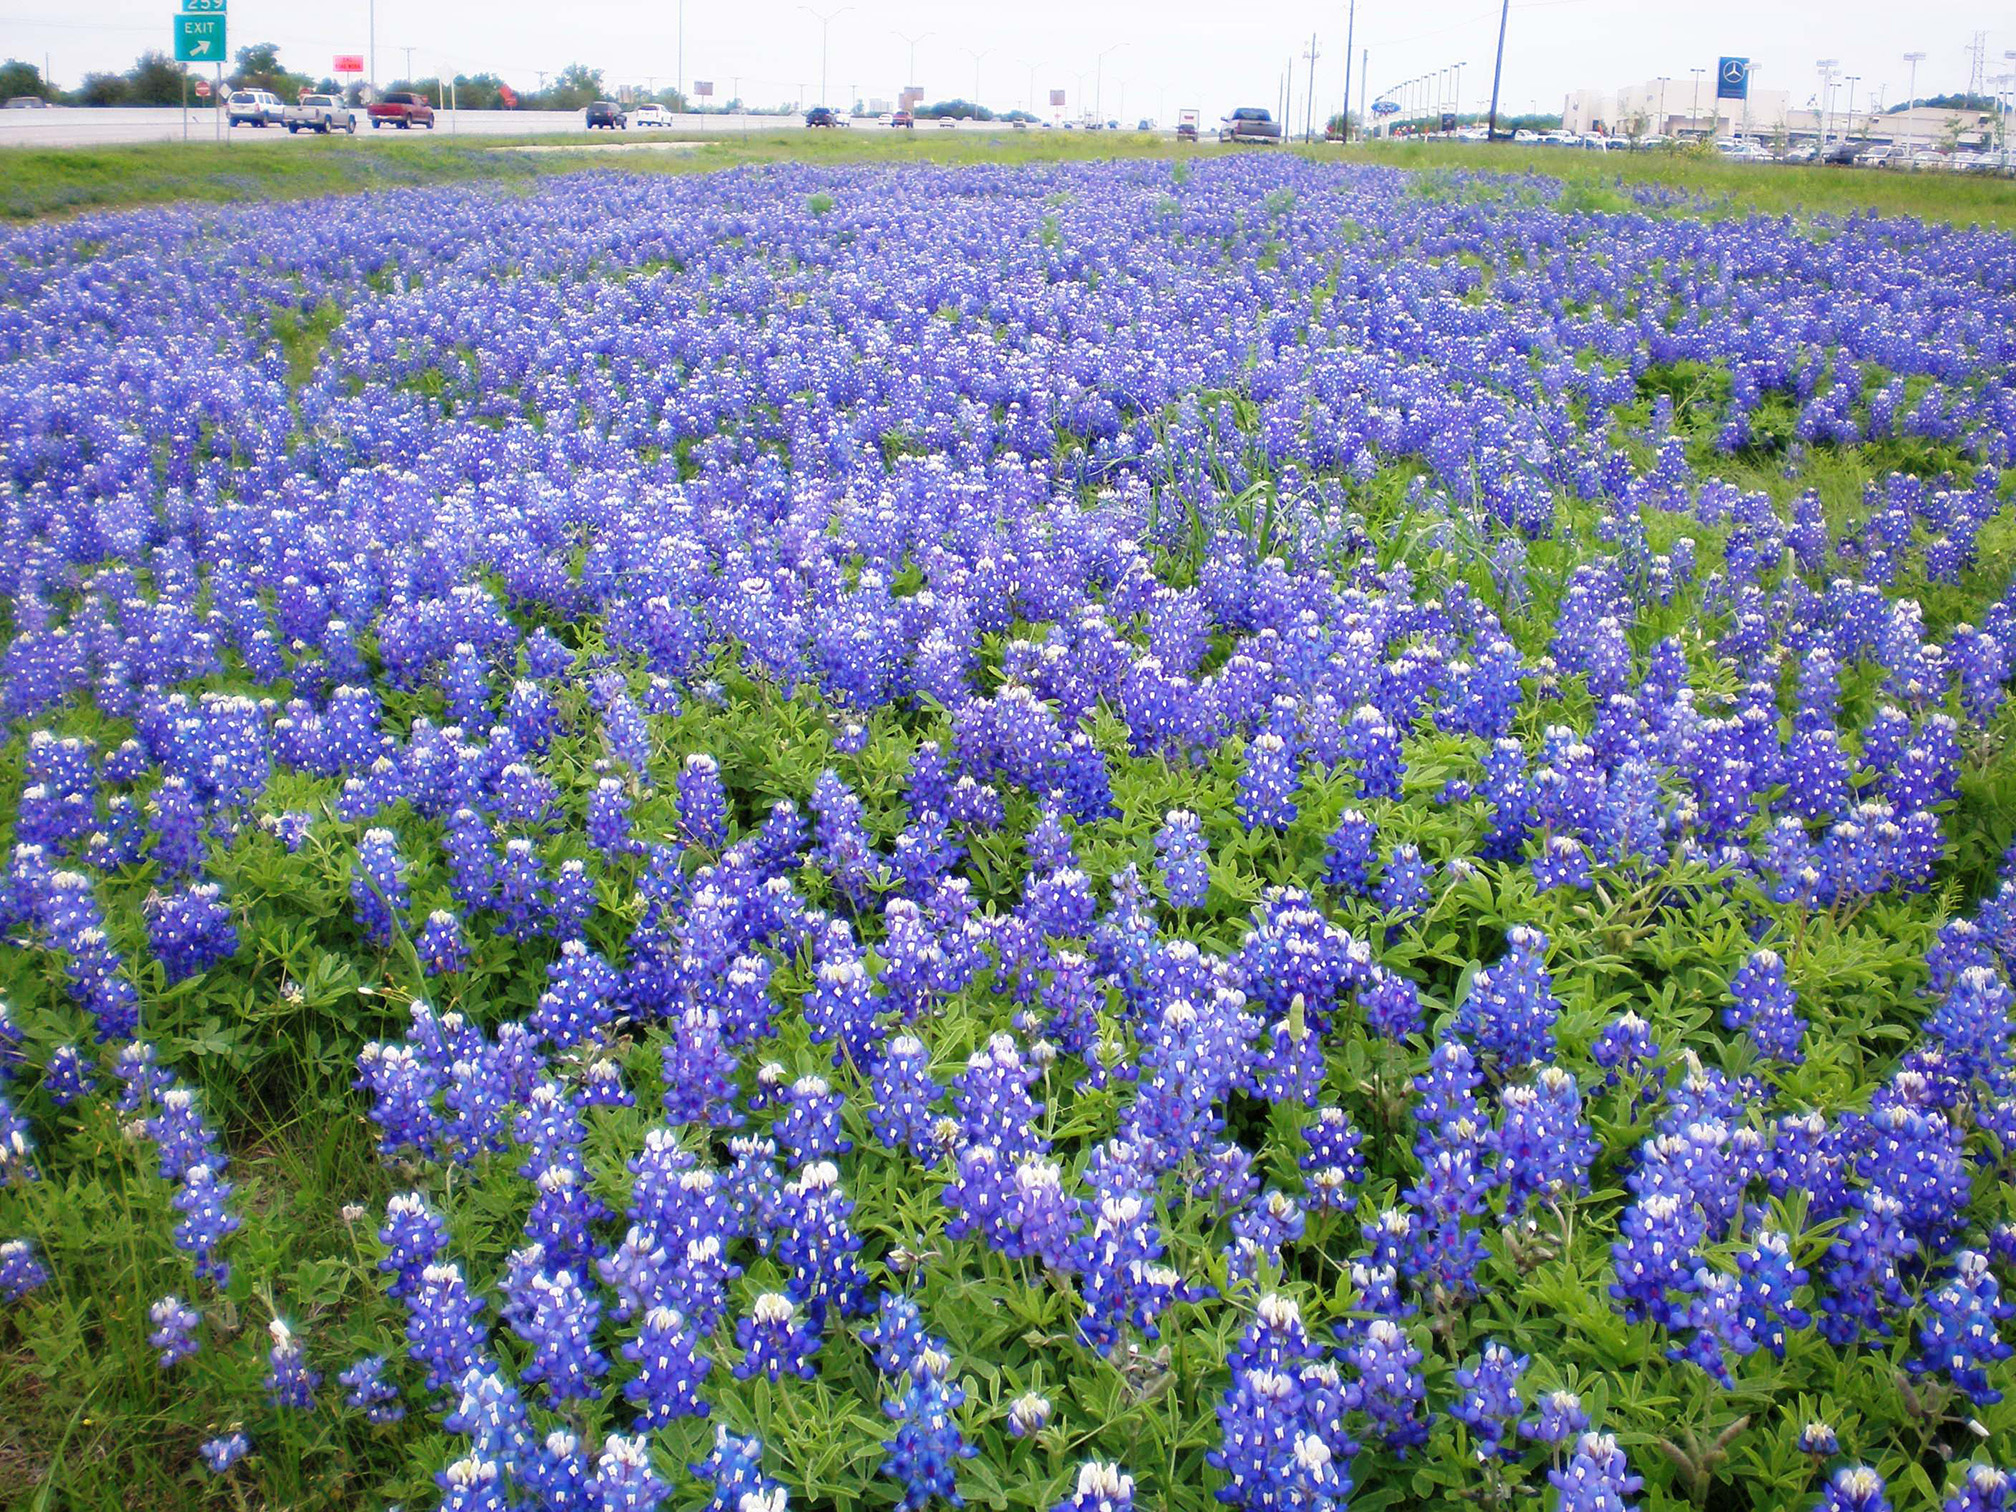 A mass of blue-and-white flower heads stretch away from the camera in a roadside field. Vehicles drive by in the distance